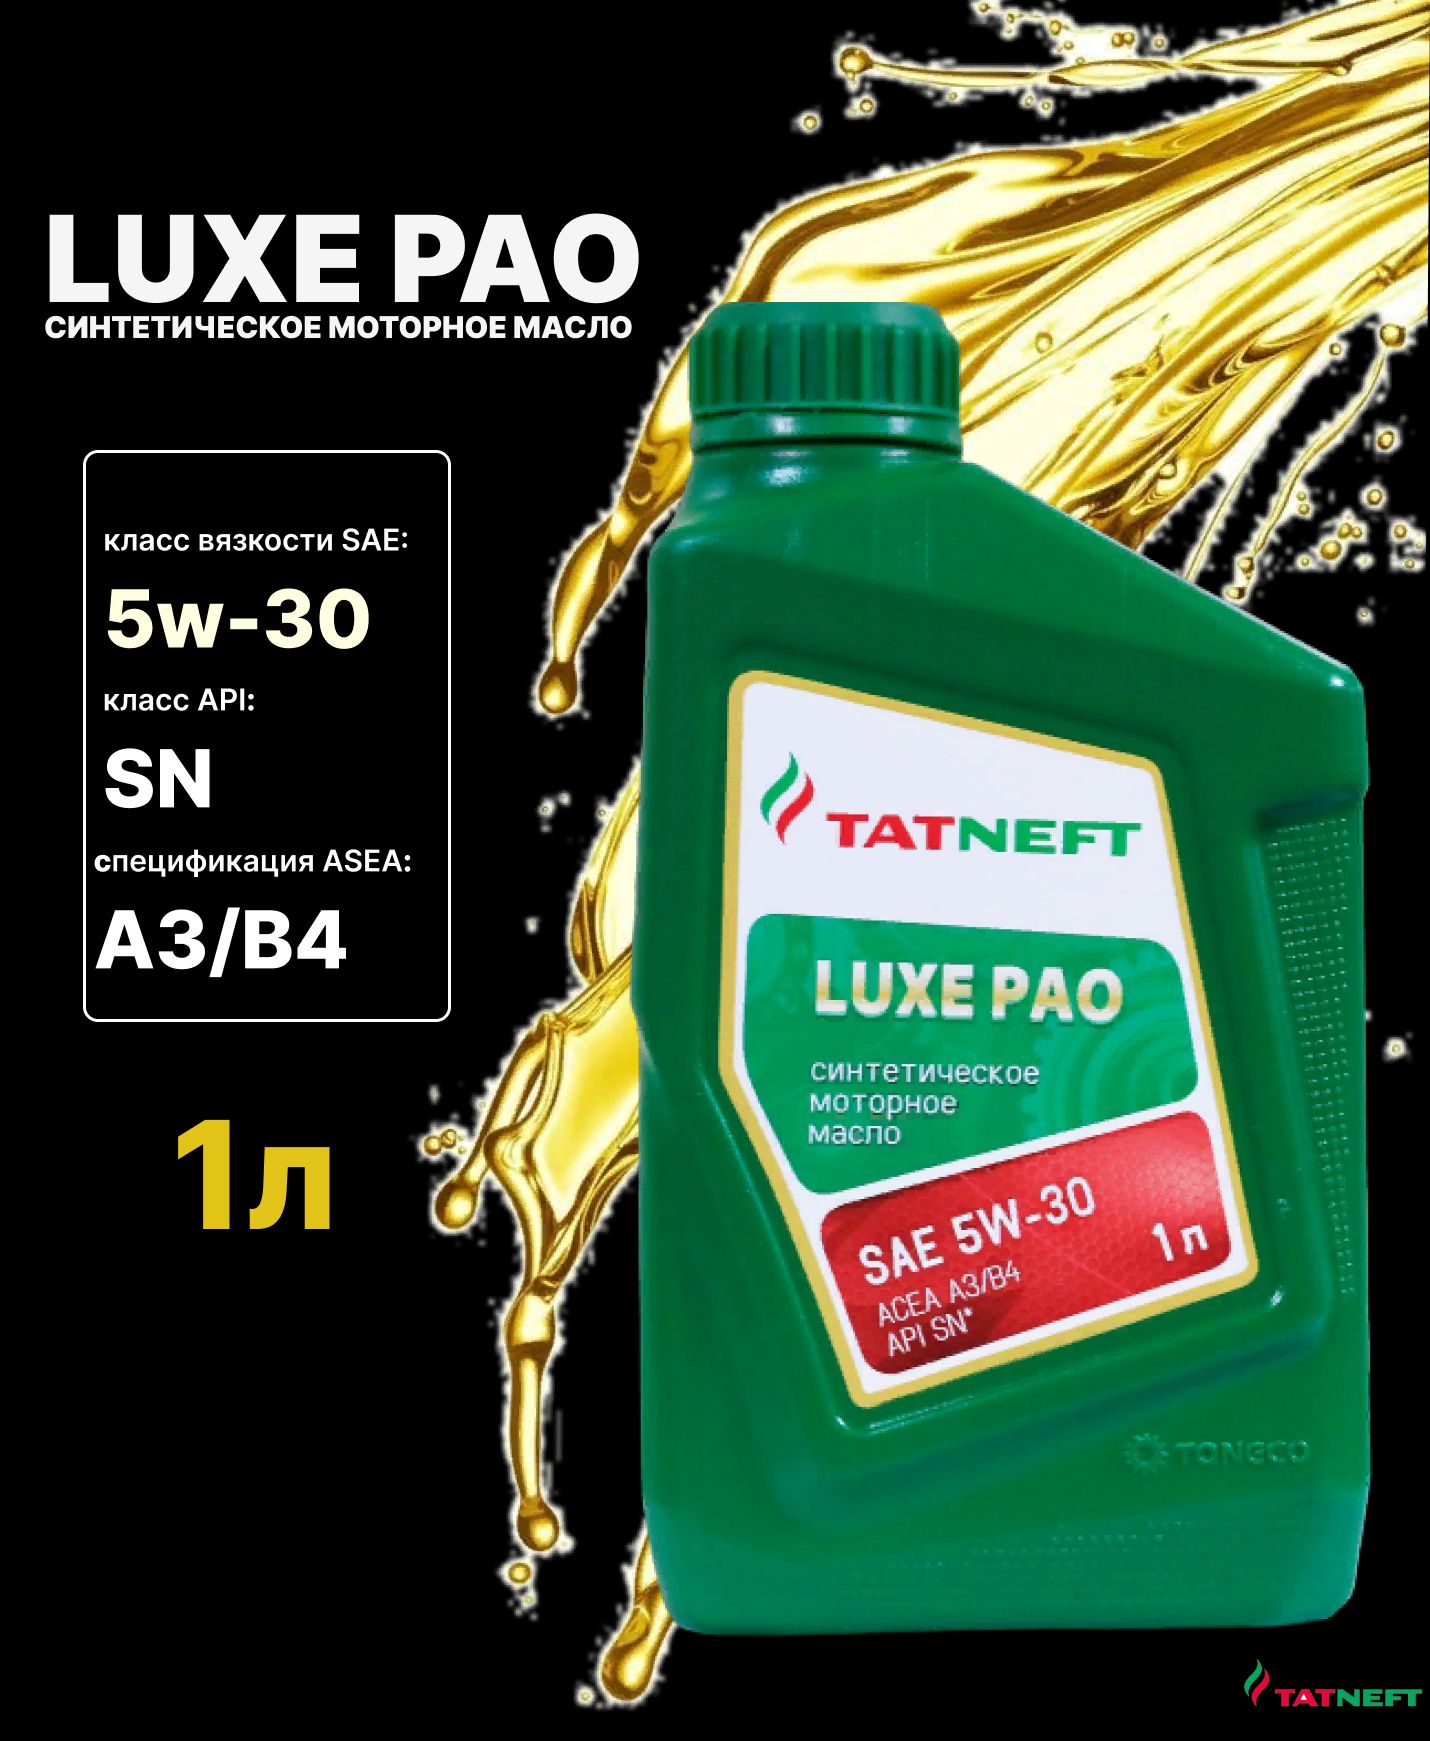 TATNEFT Luxe Pao 5w30. Моторное масло TATNEFT Luxe Pao 5w-30 синтетическое. 5w30 Pao TATNEFT. TATNEFT Luxe Pao 5w-30 в дизельный Мерседес. Моторное масло pao 5w30